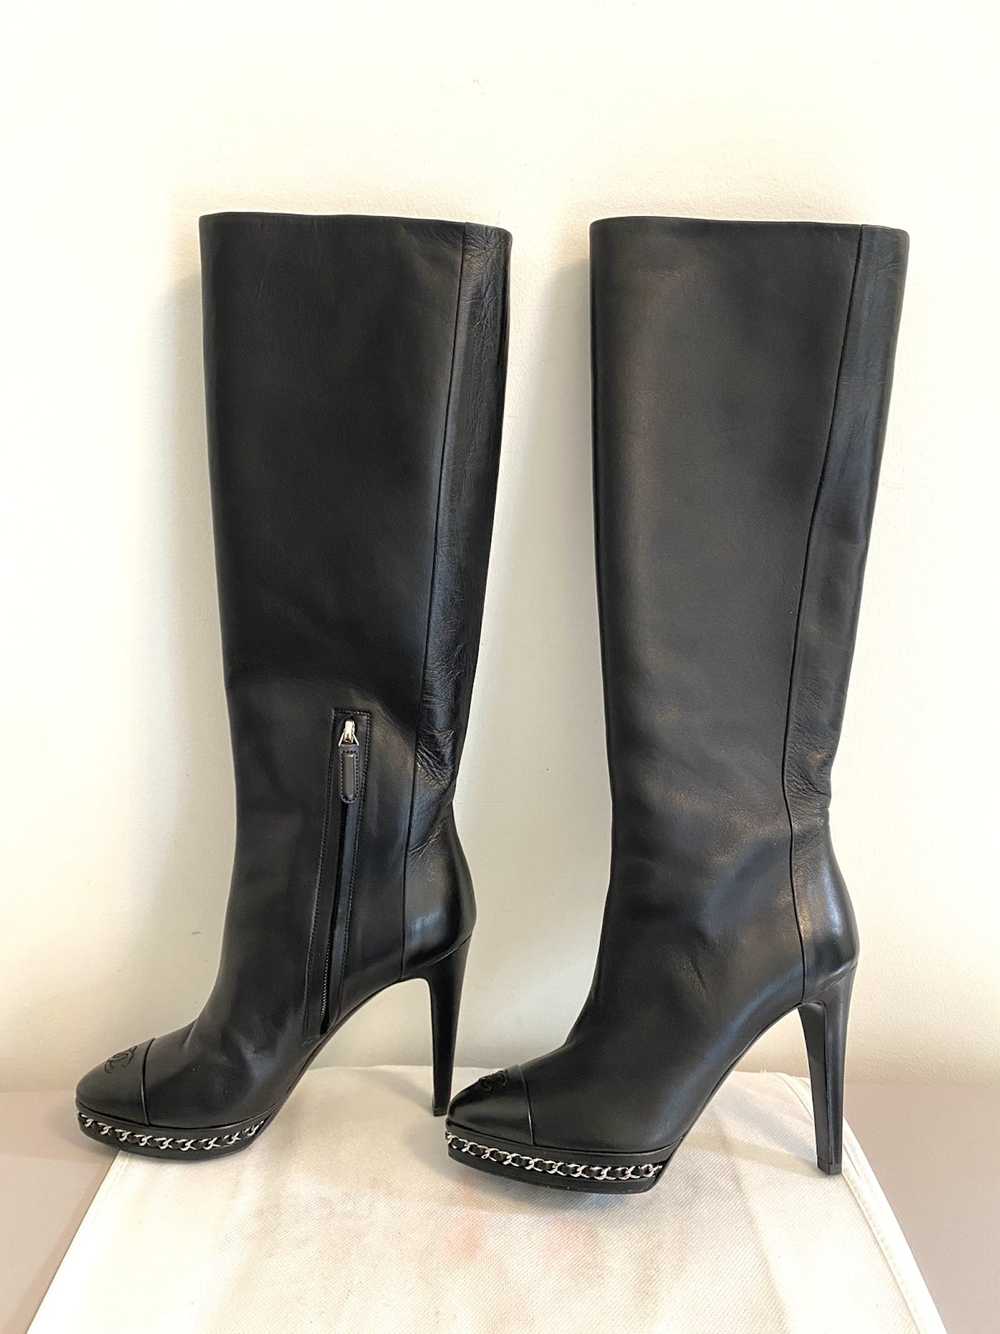 Chanel Authentic Chanel leather boots - image 5